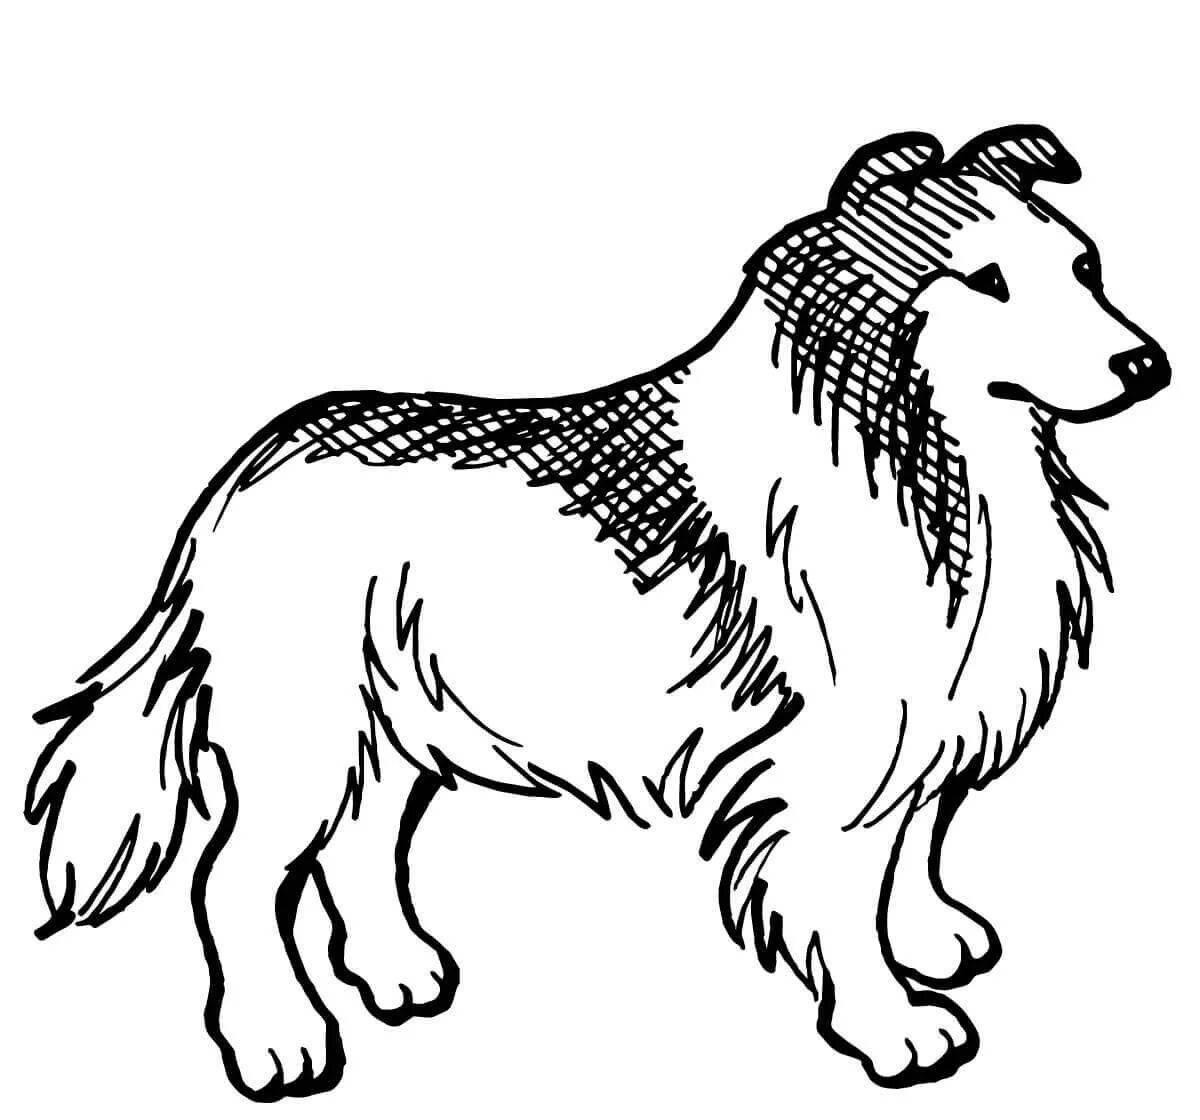 Cute service dogs coloring pages for kids